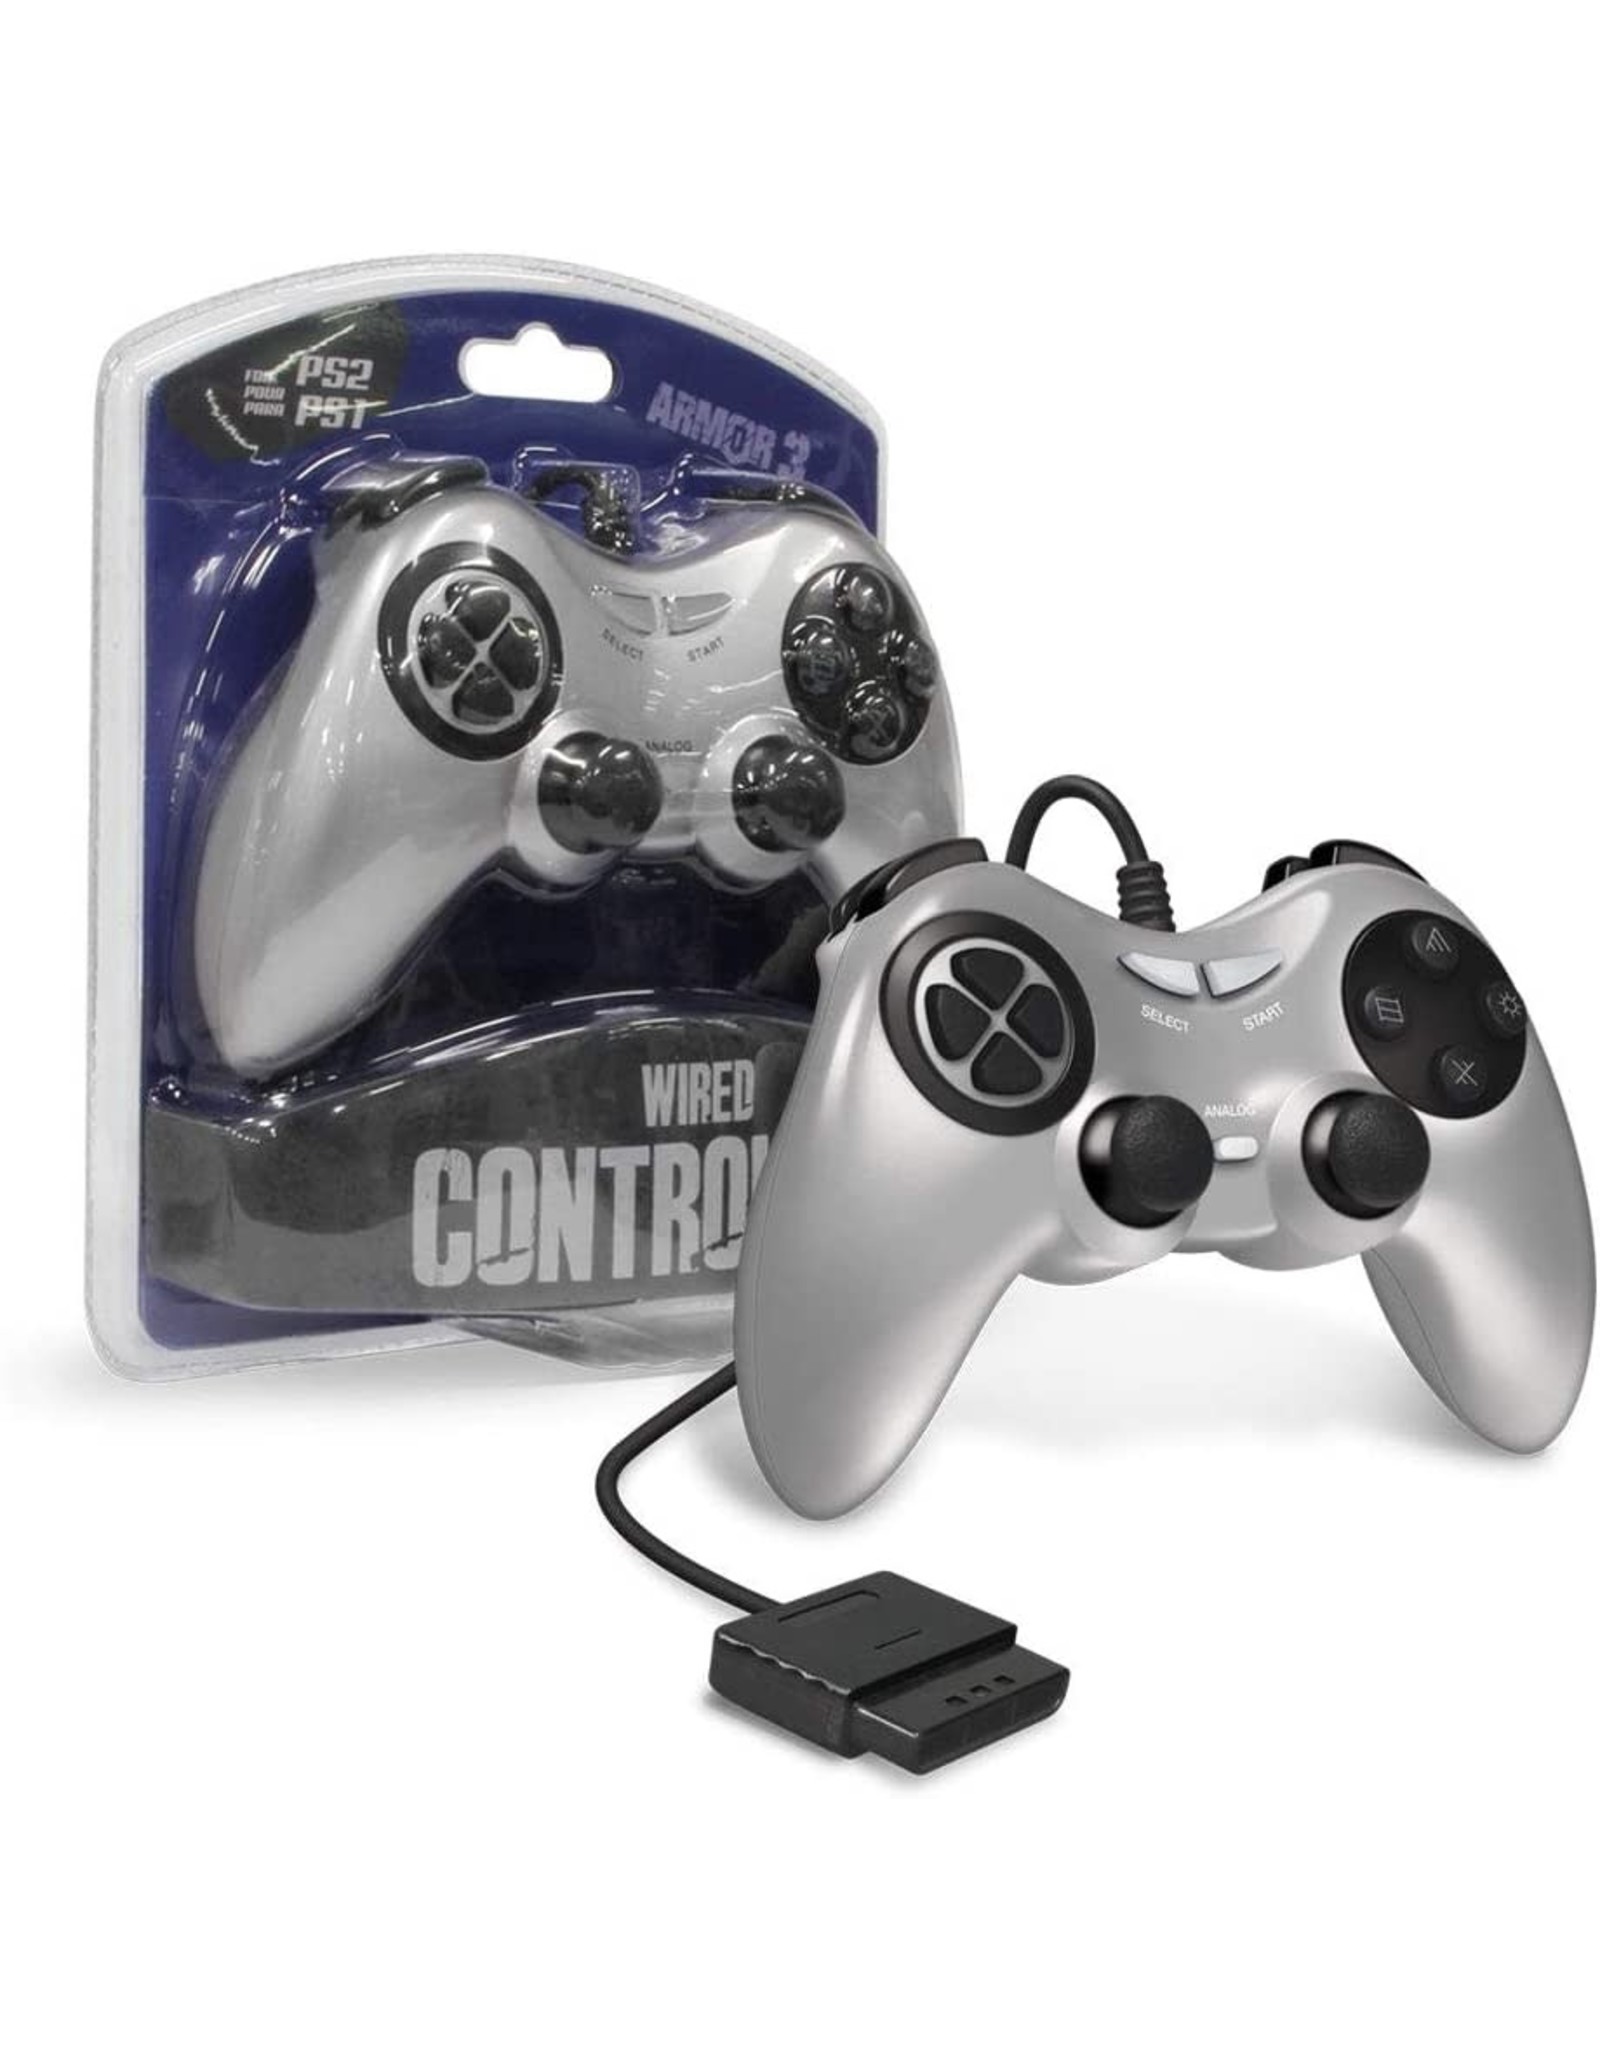 Playstation 2 PS2 Playstation 2 Controller - Silver, Armor 3 (Brand New)